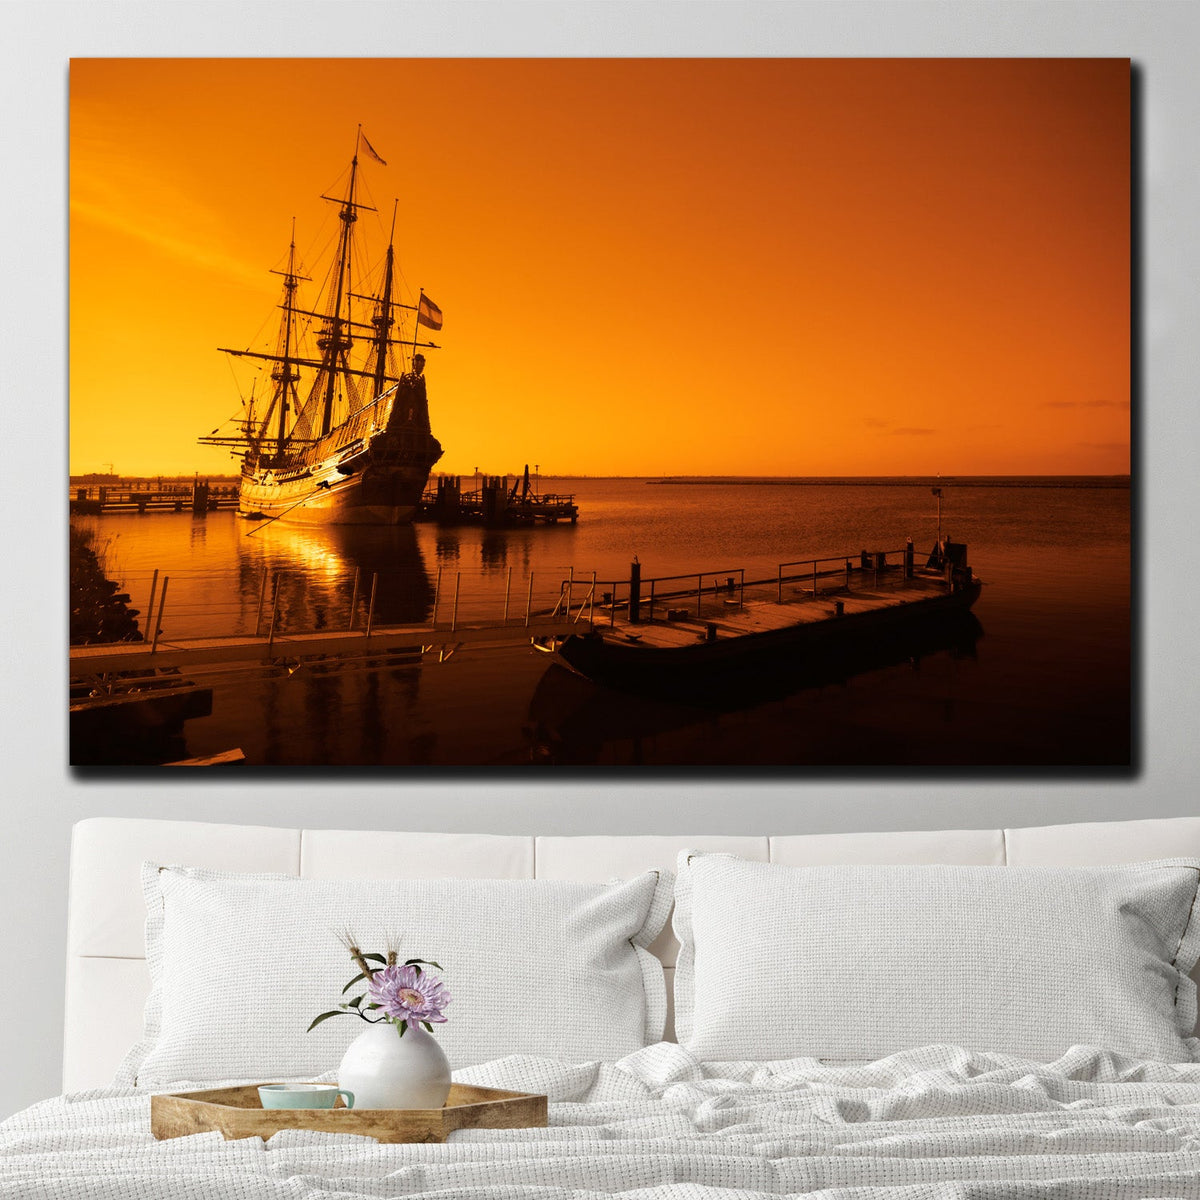 https://cdn.shopify.com/s/files/1/0387/9986/8044/products/ShipintheQuayCanvasArtprintStretched-2.jpg